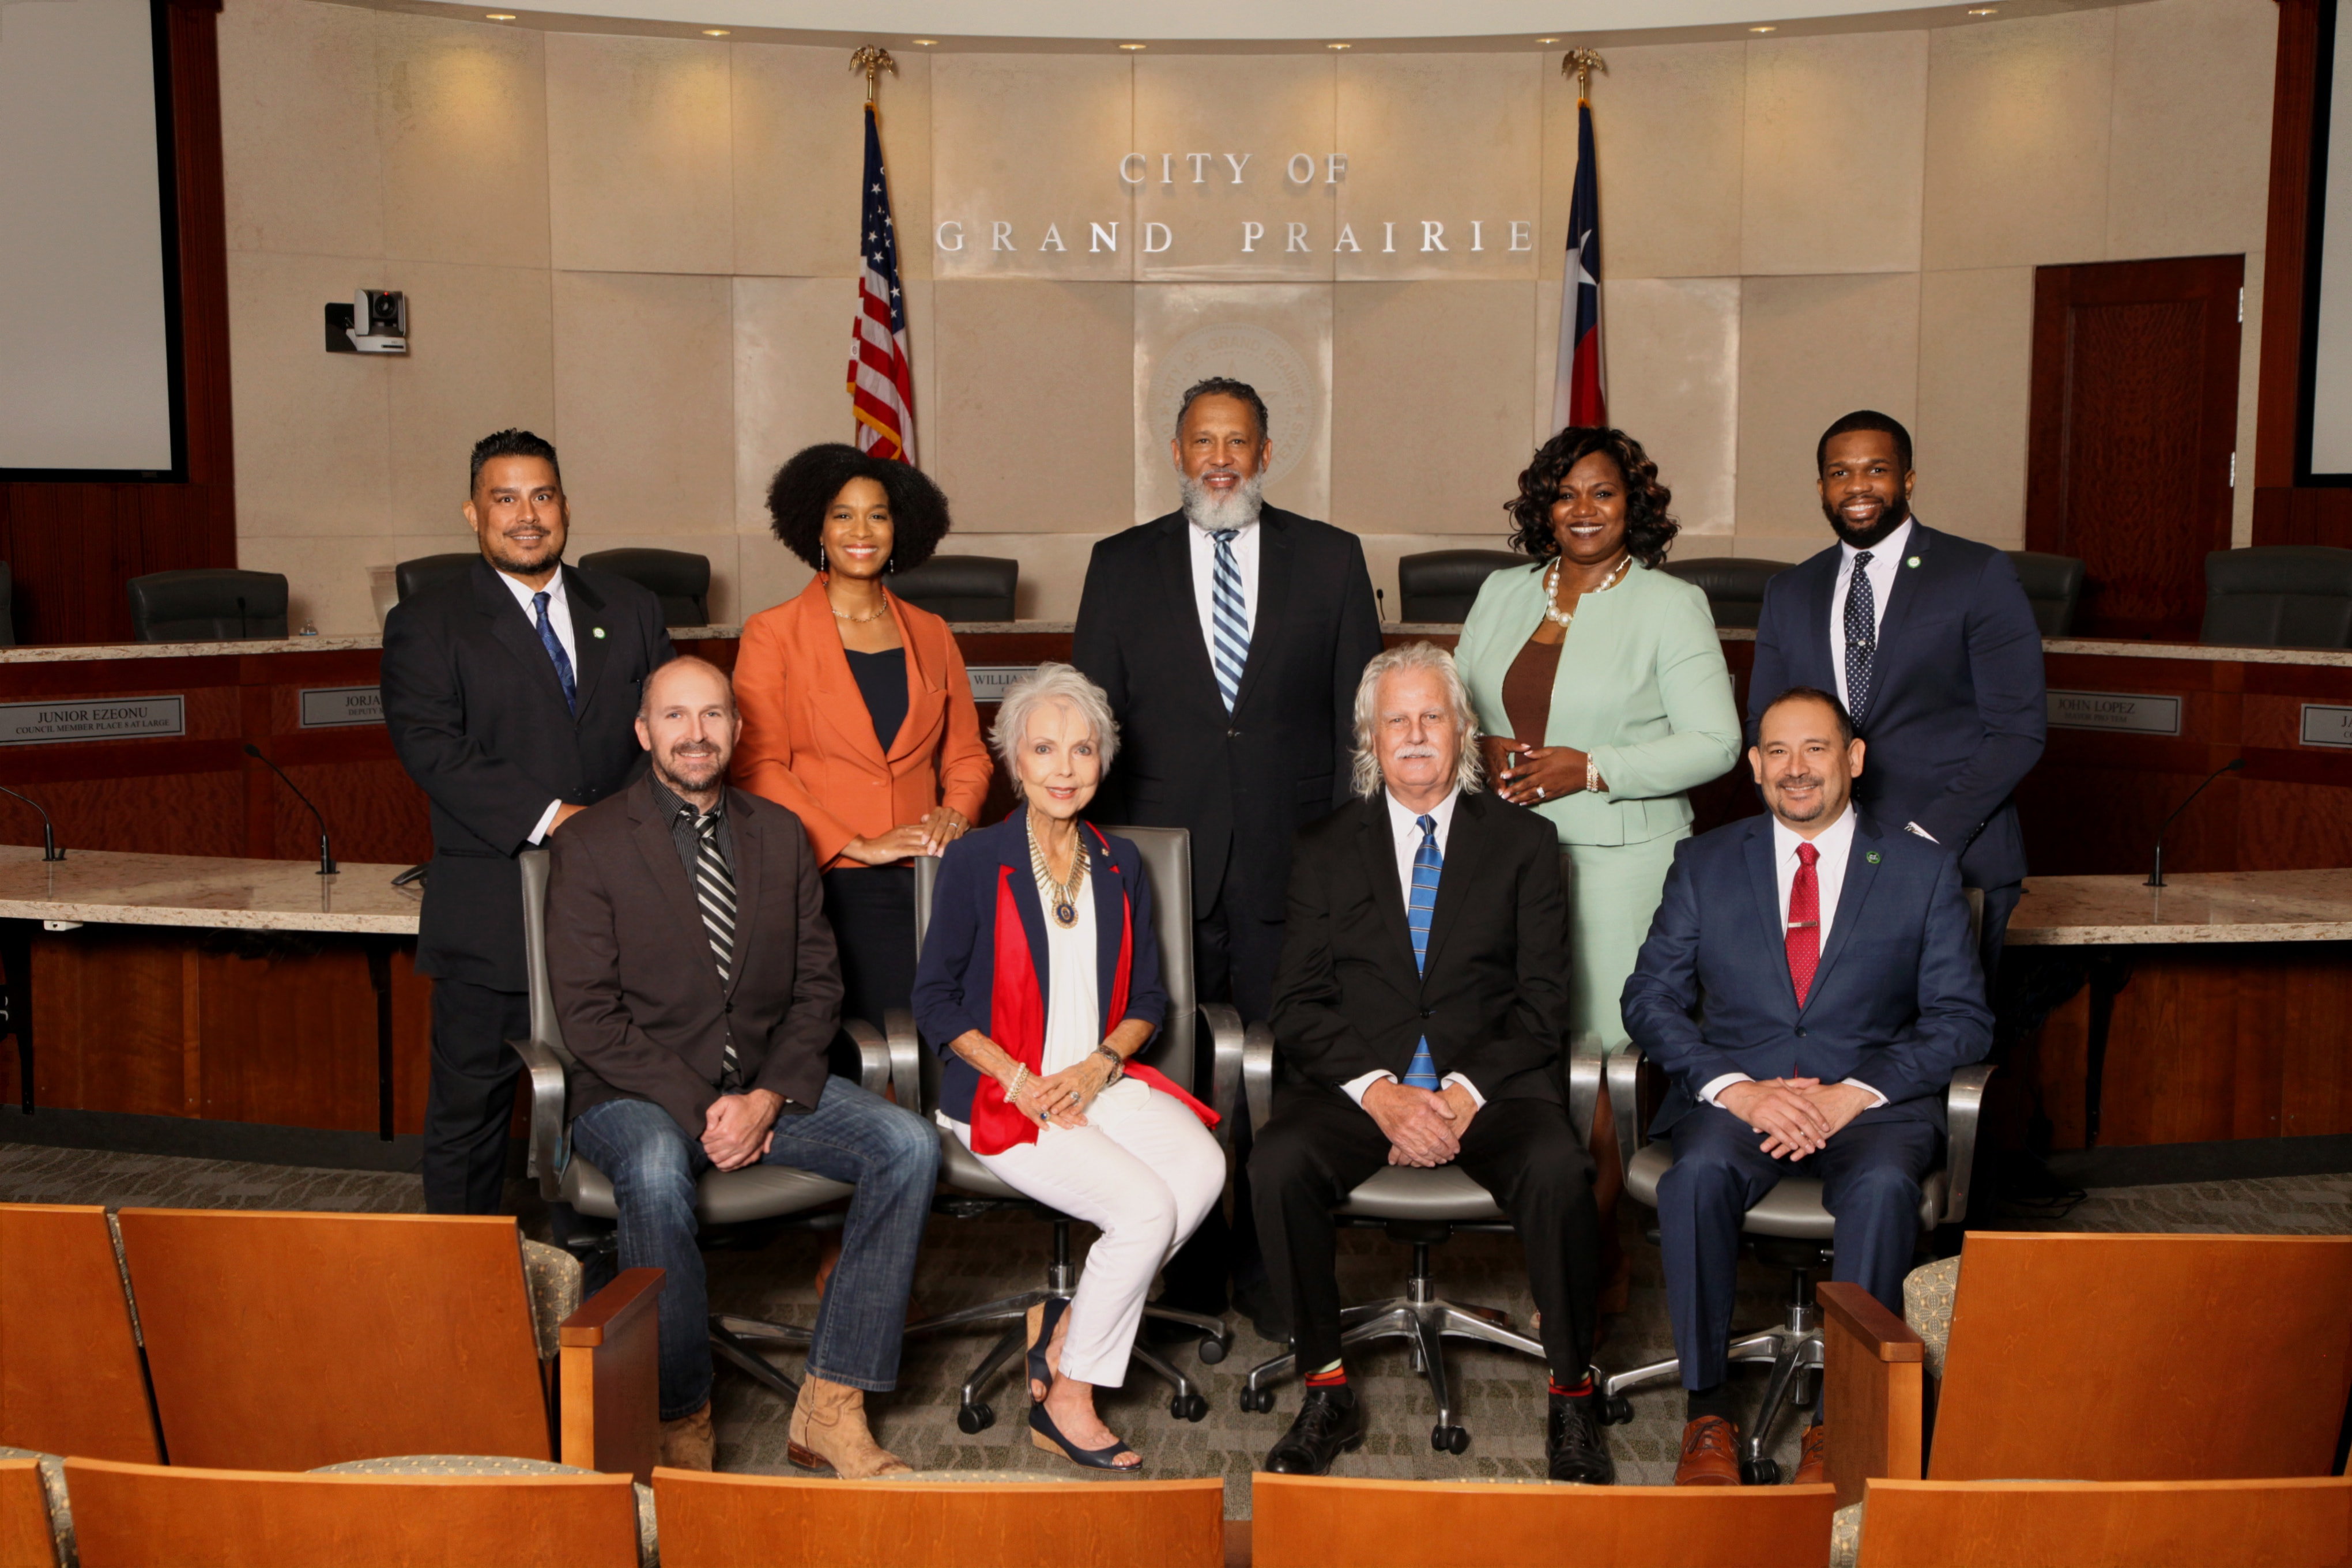 Group photo of the mayor and city council members